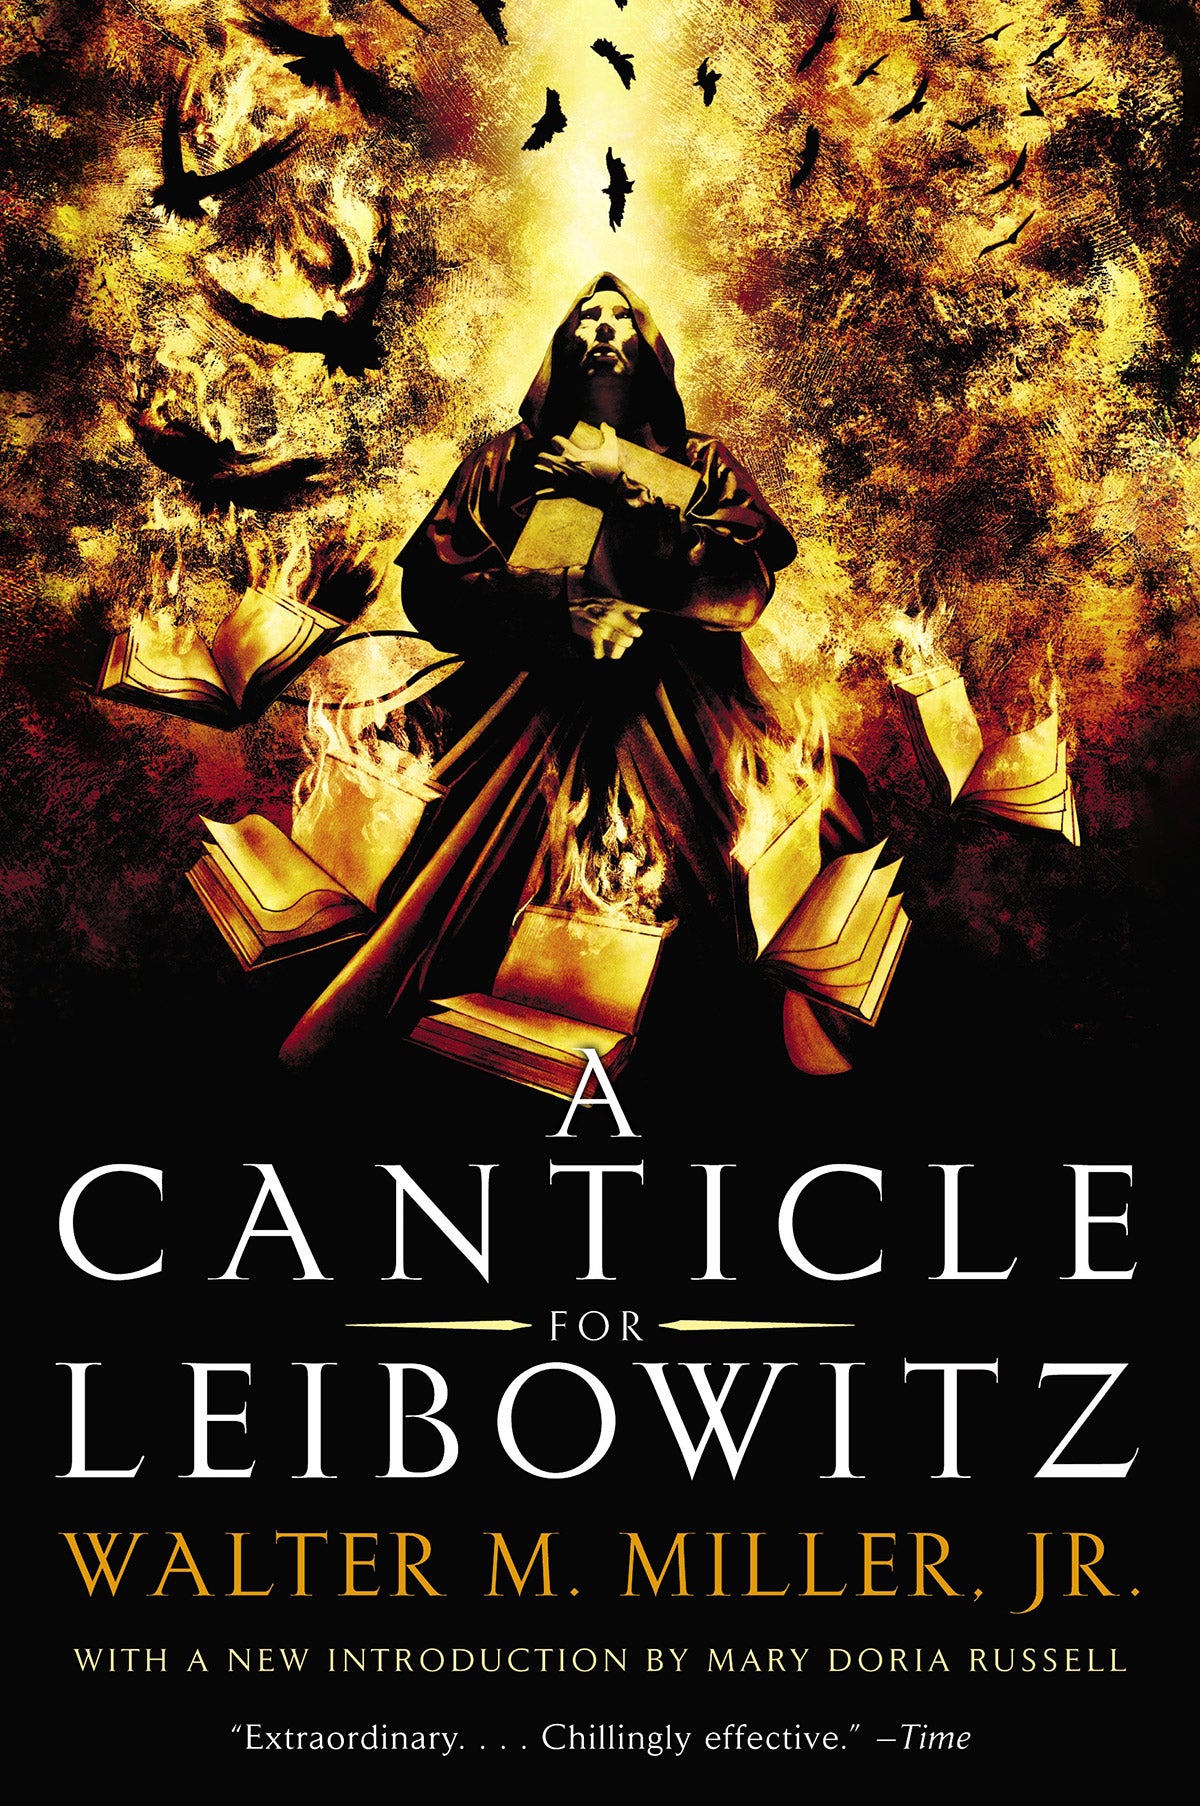 A cover photo for the book "A Canticle for Leibowitz"